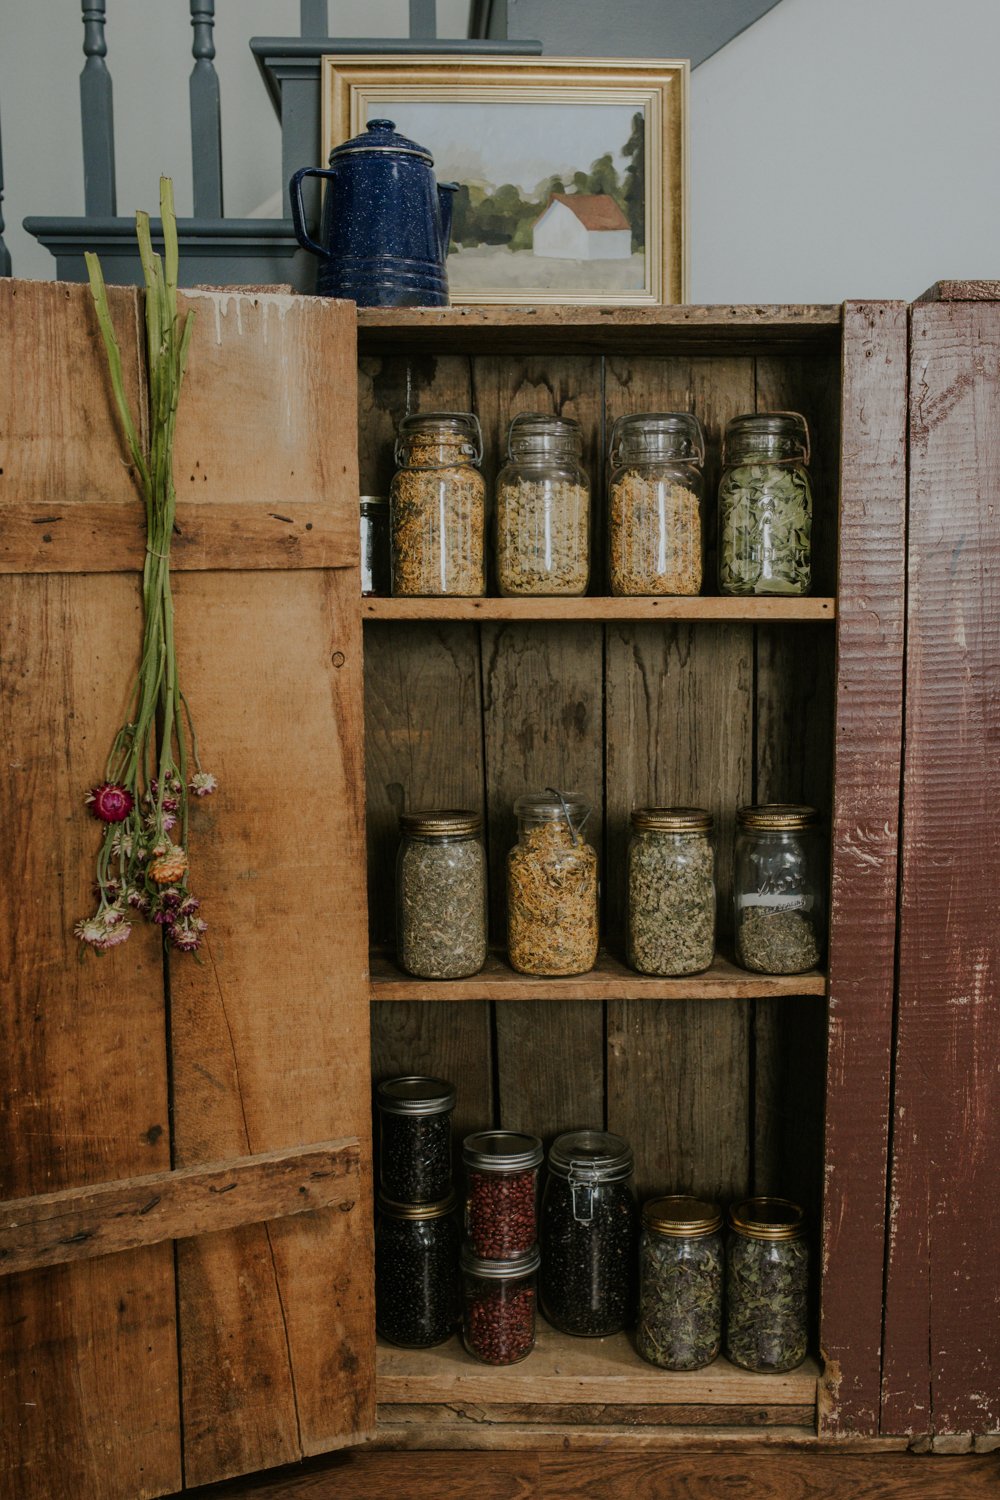 What's in my apothecary cabinet